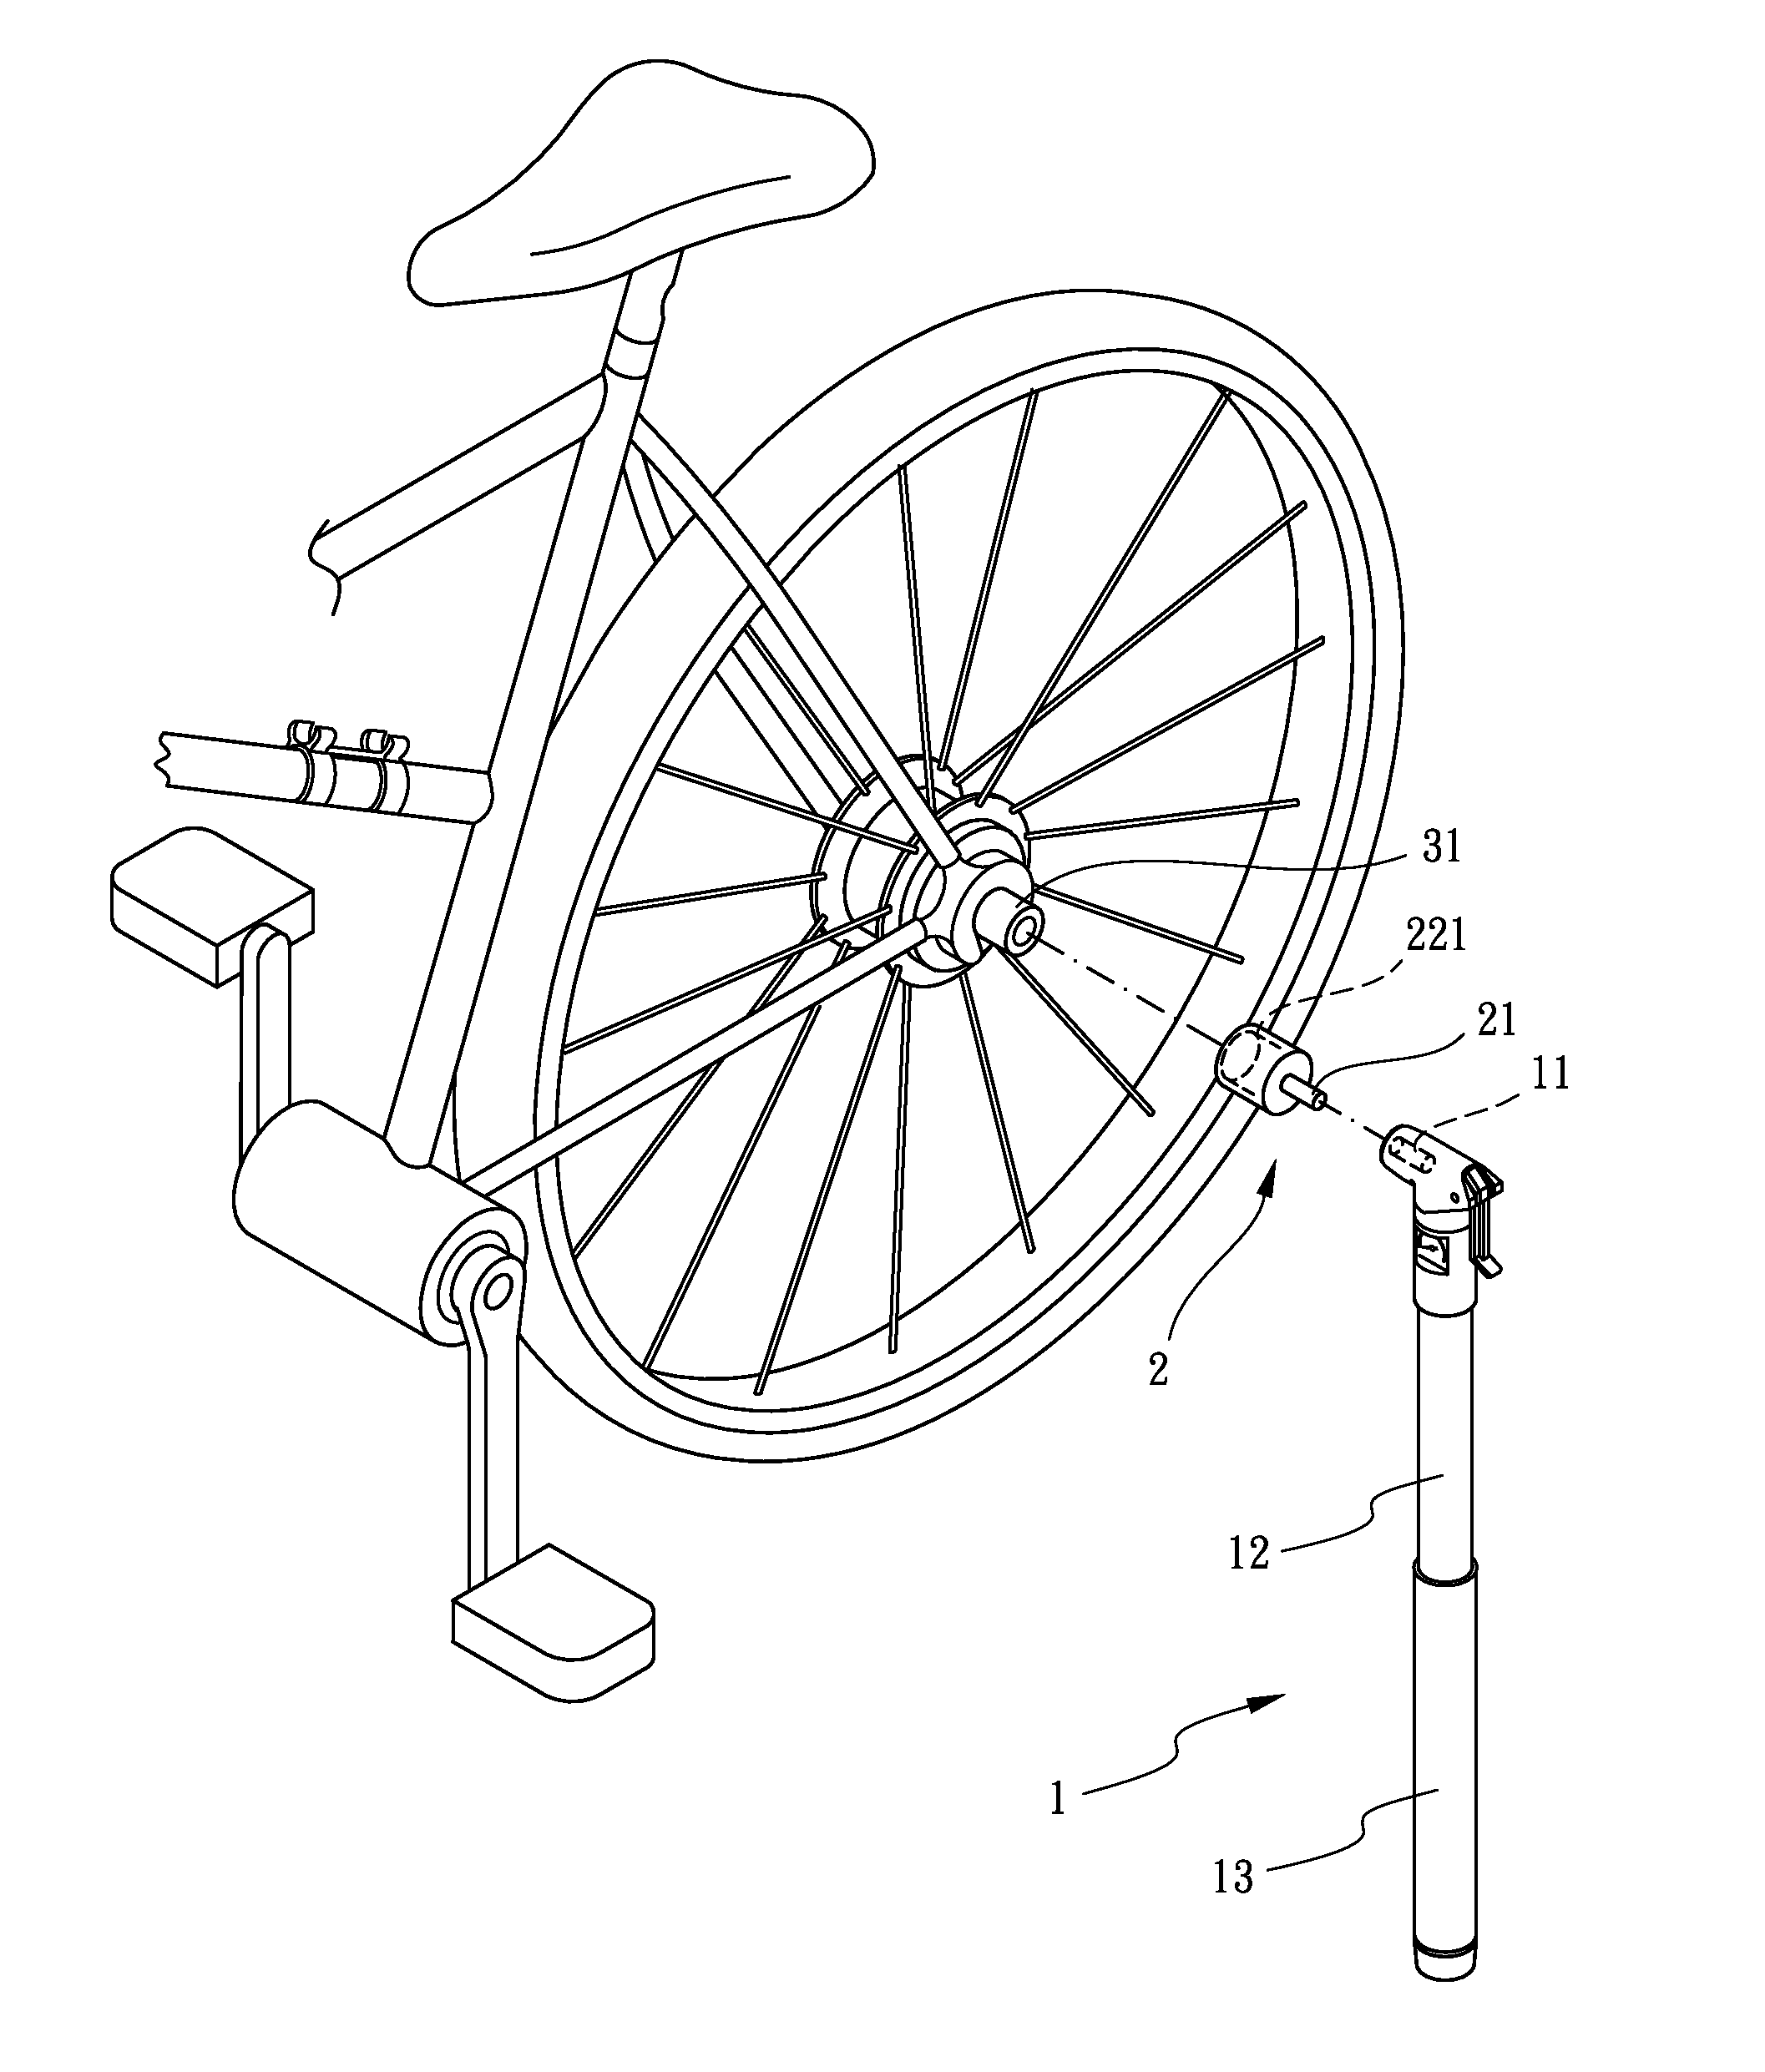 Parking device for a bicycle